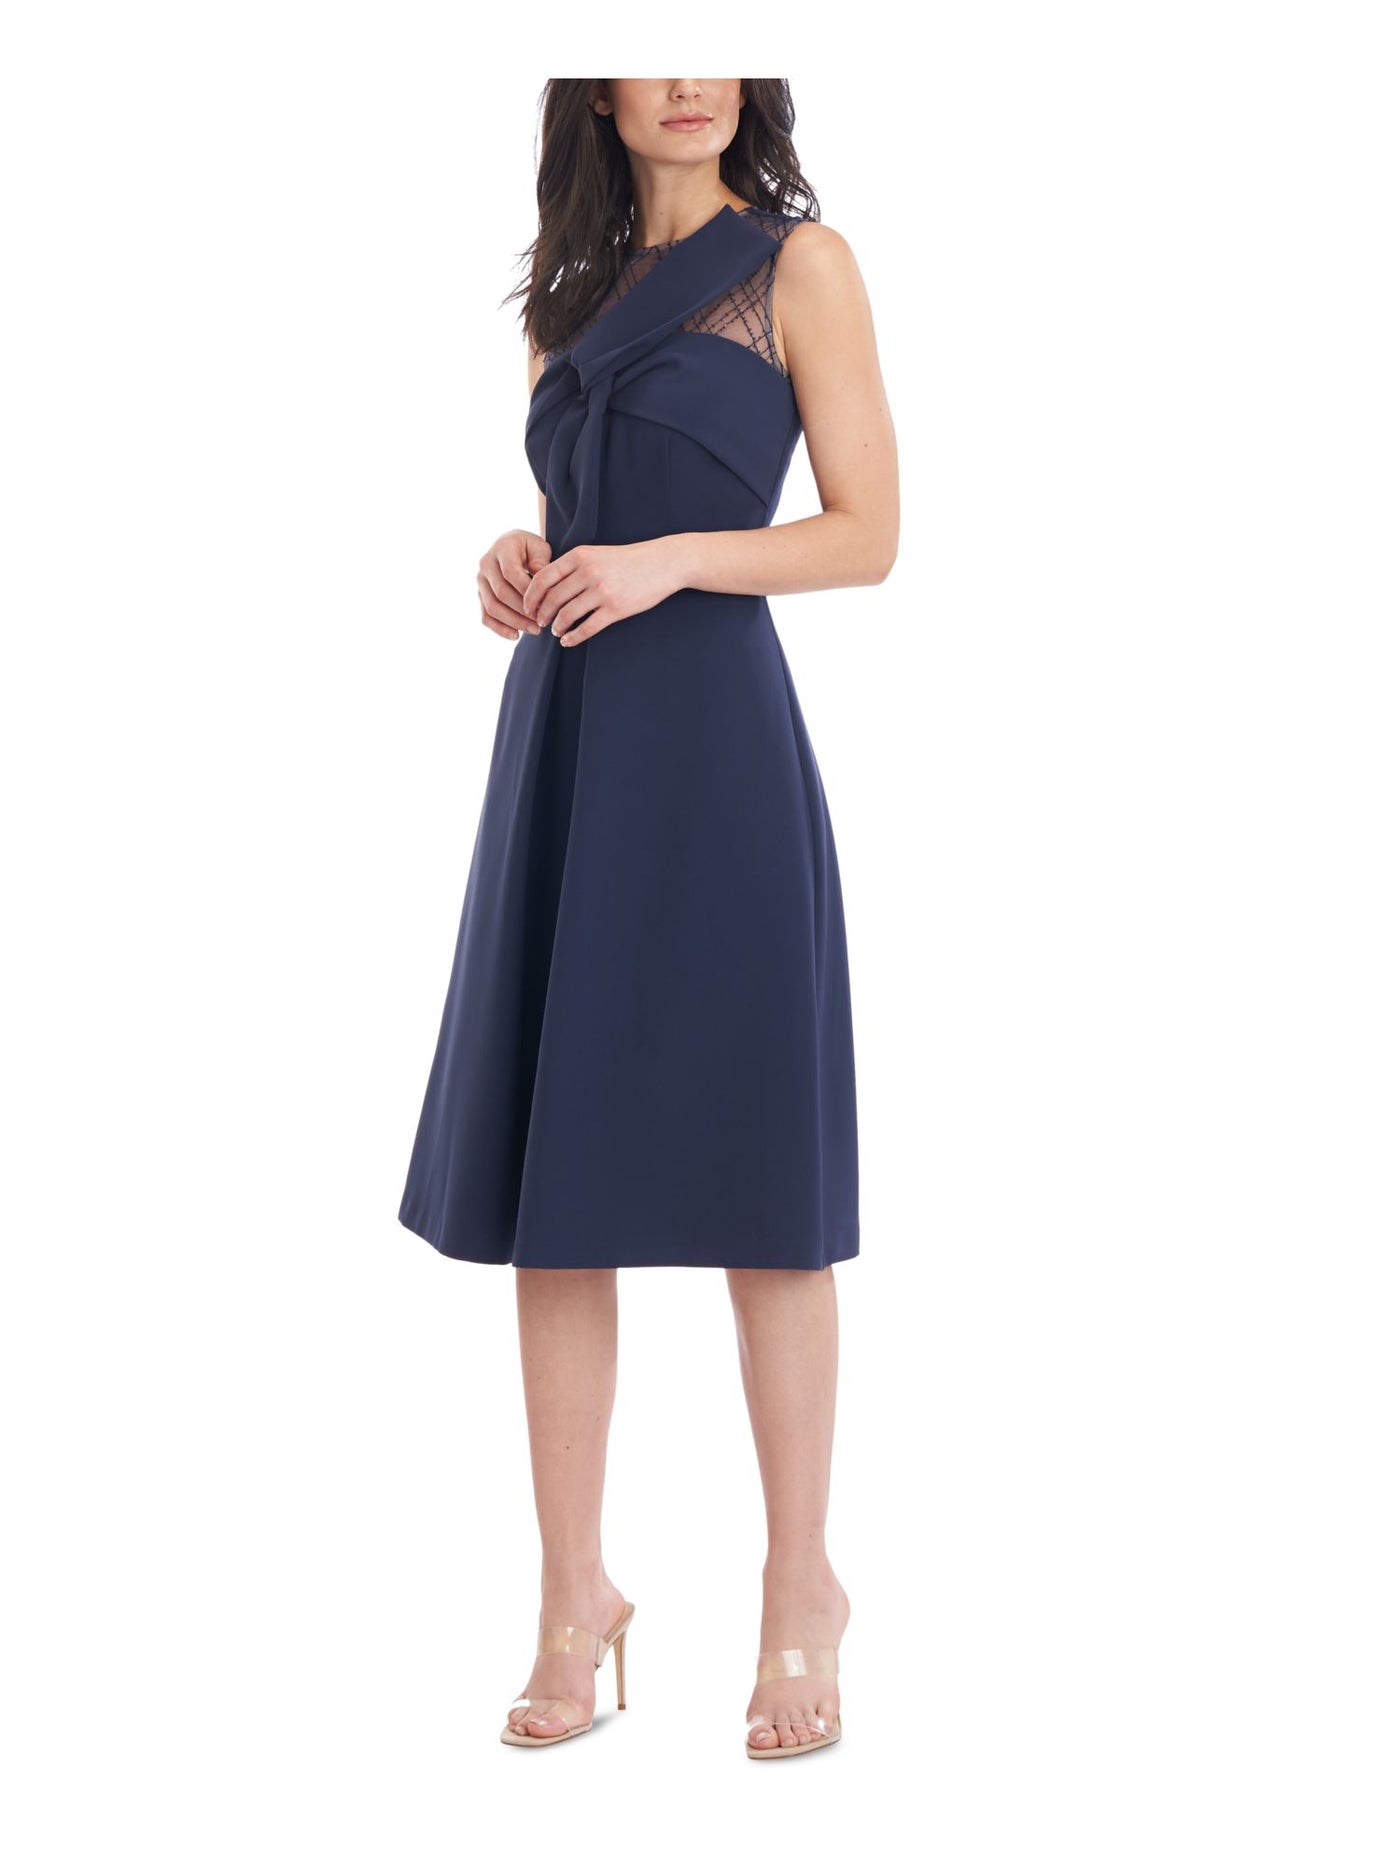 JS COLLECTIONS Womens Navy Zippered Sequined Lined Sleeveless Illusion Neckline Below The Knee Party Fit + Flare Dress 14